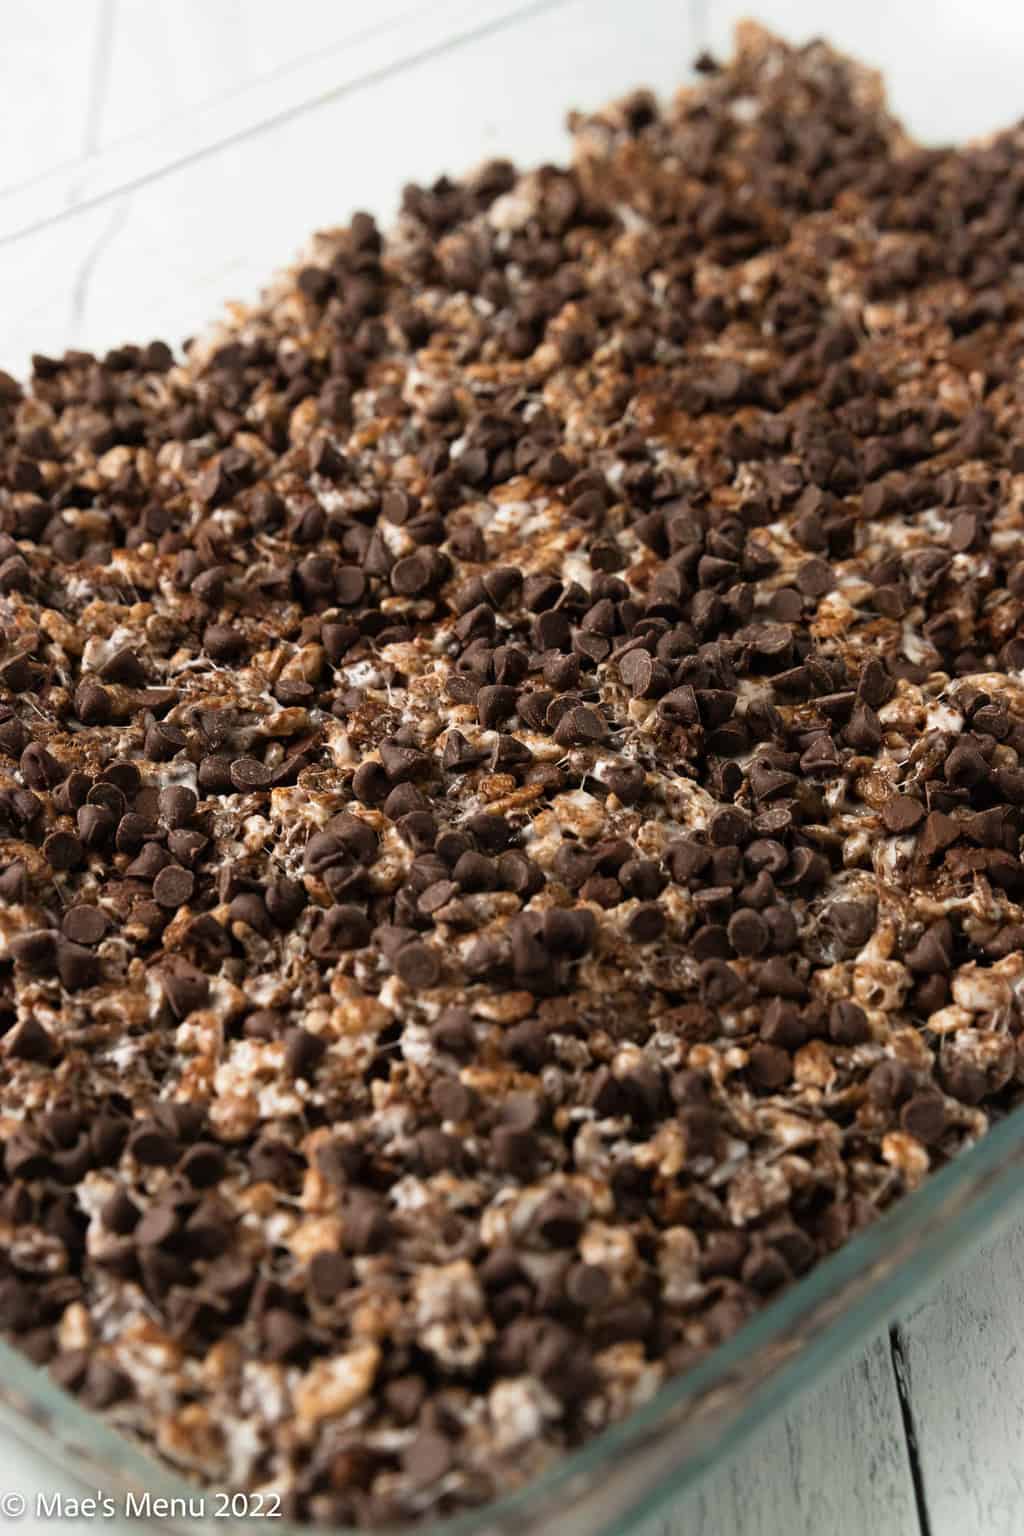 A side shot of a large tray of chocolate rice crisps sprinkled with chocolate chips.